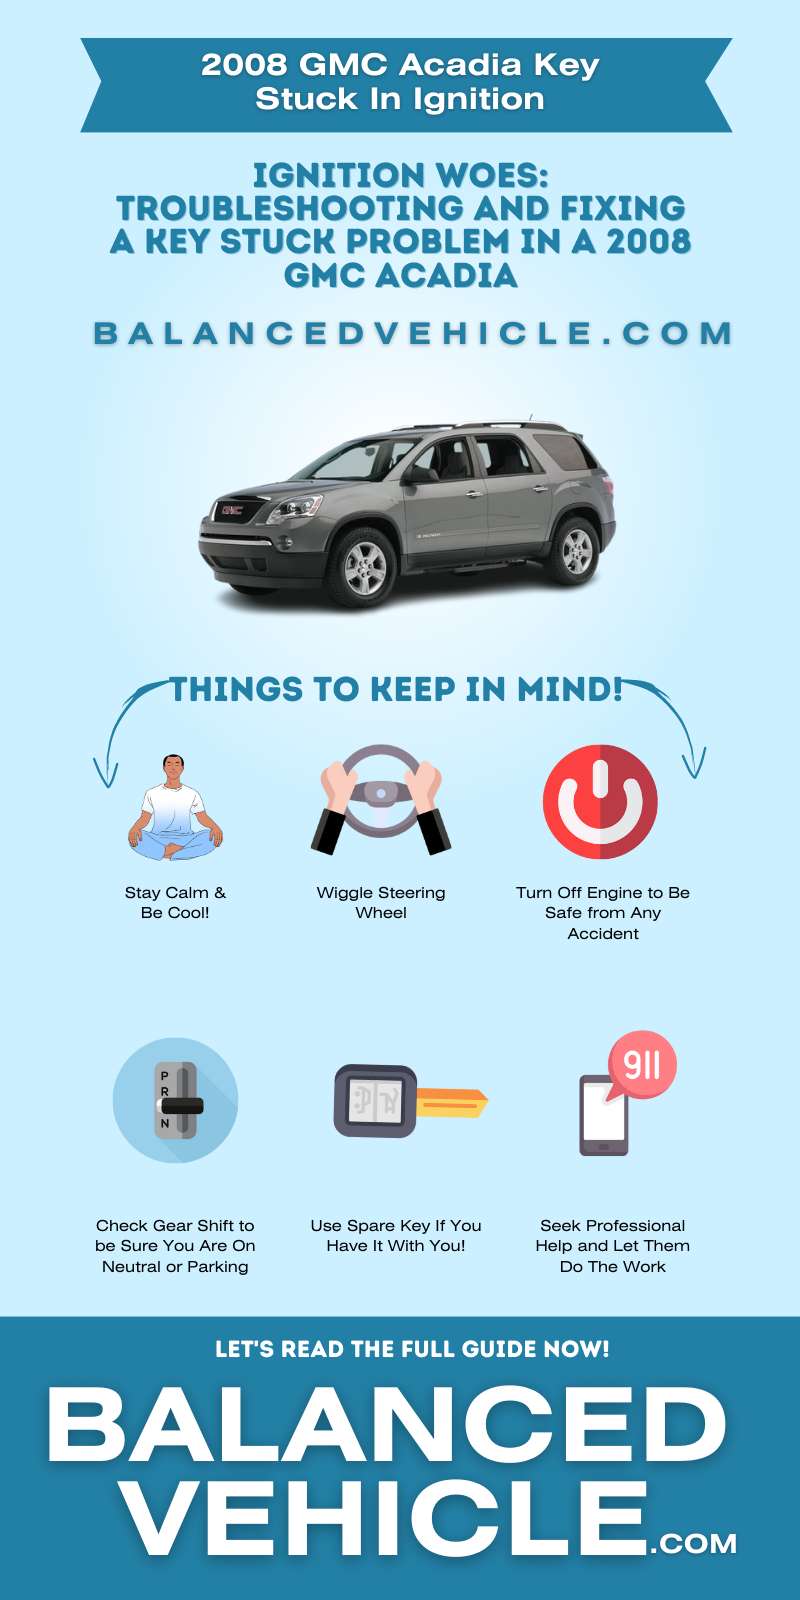 2008 GMC Acadia Key Stuck In Ignition infographic guided by BalancedVehicle.com